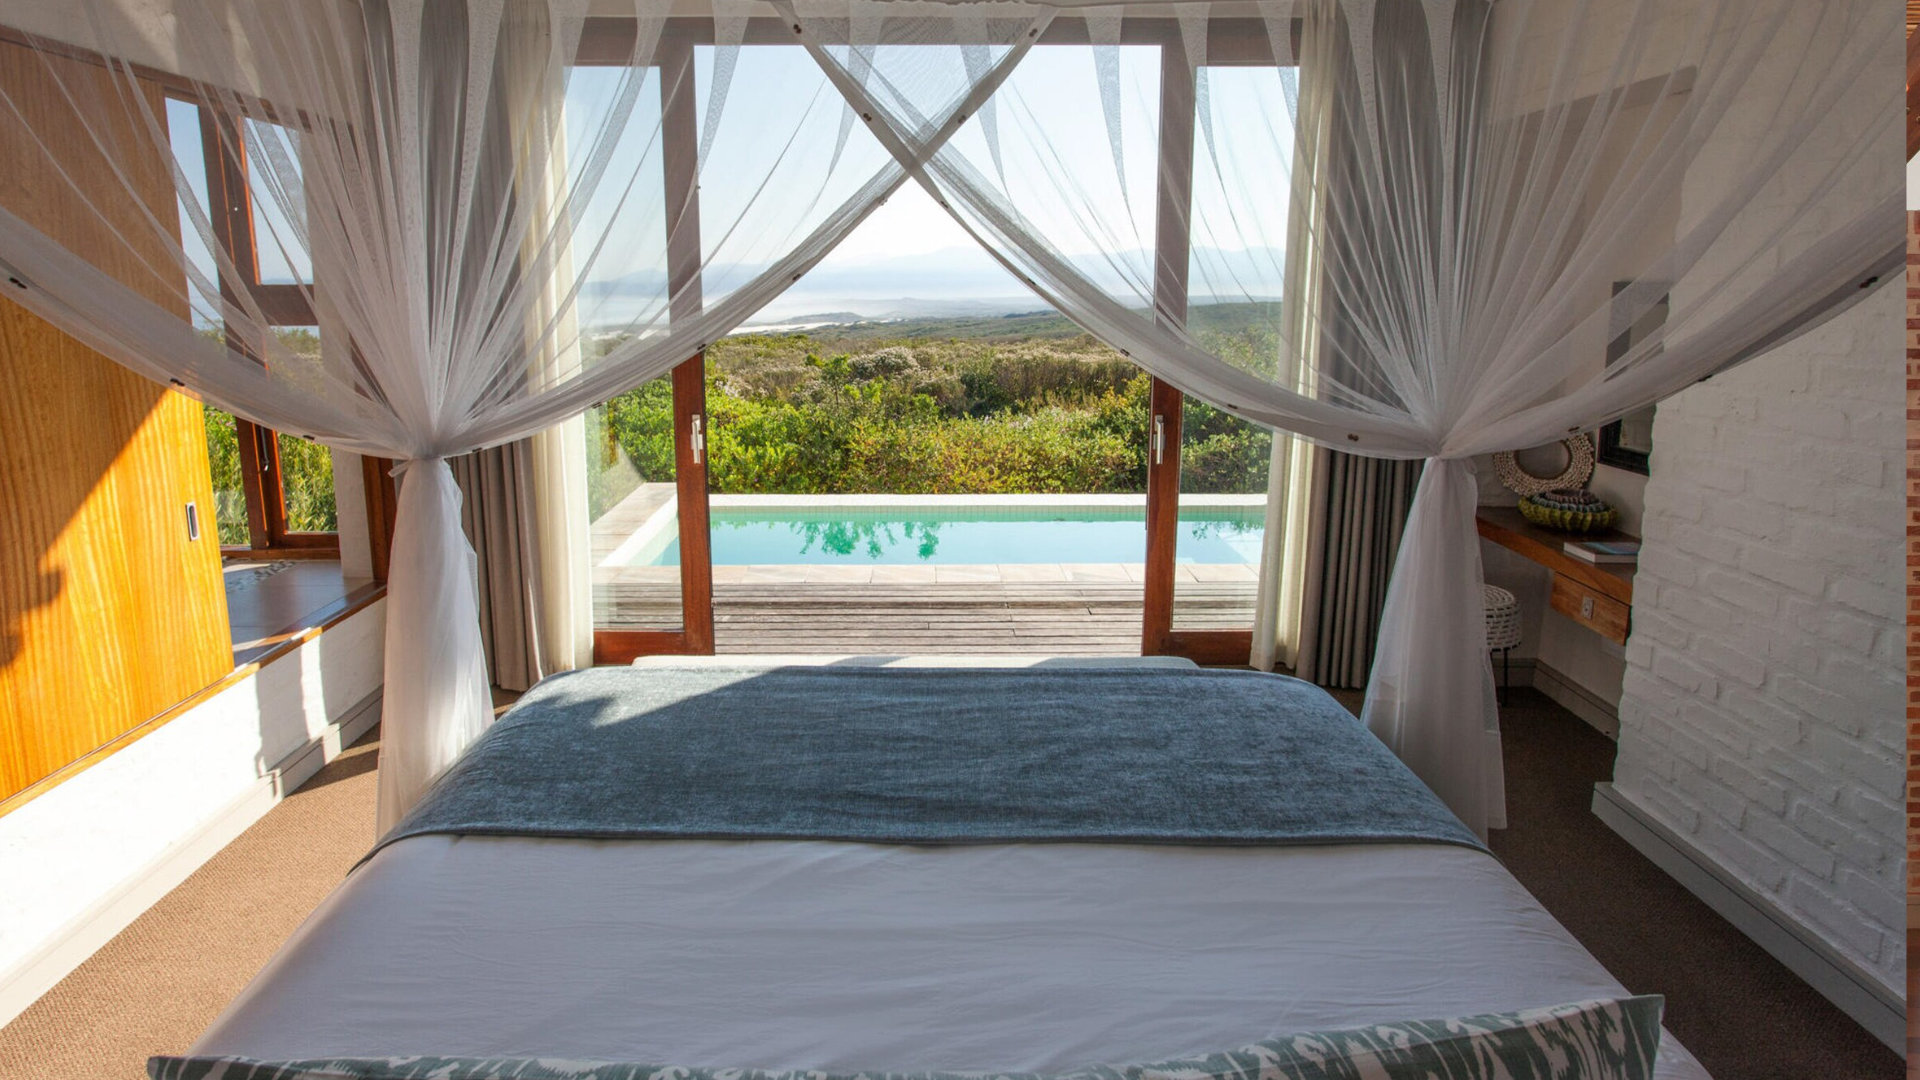 View from a Proivate Bedroom at the Forest Lodge